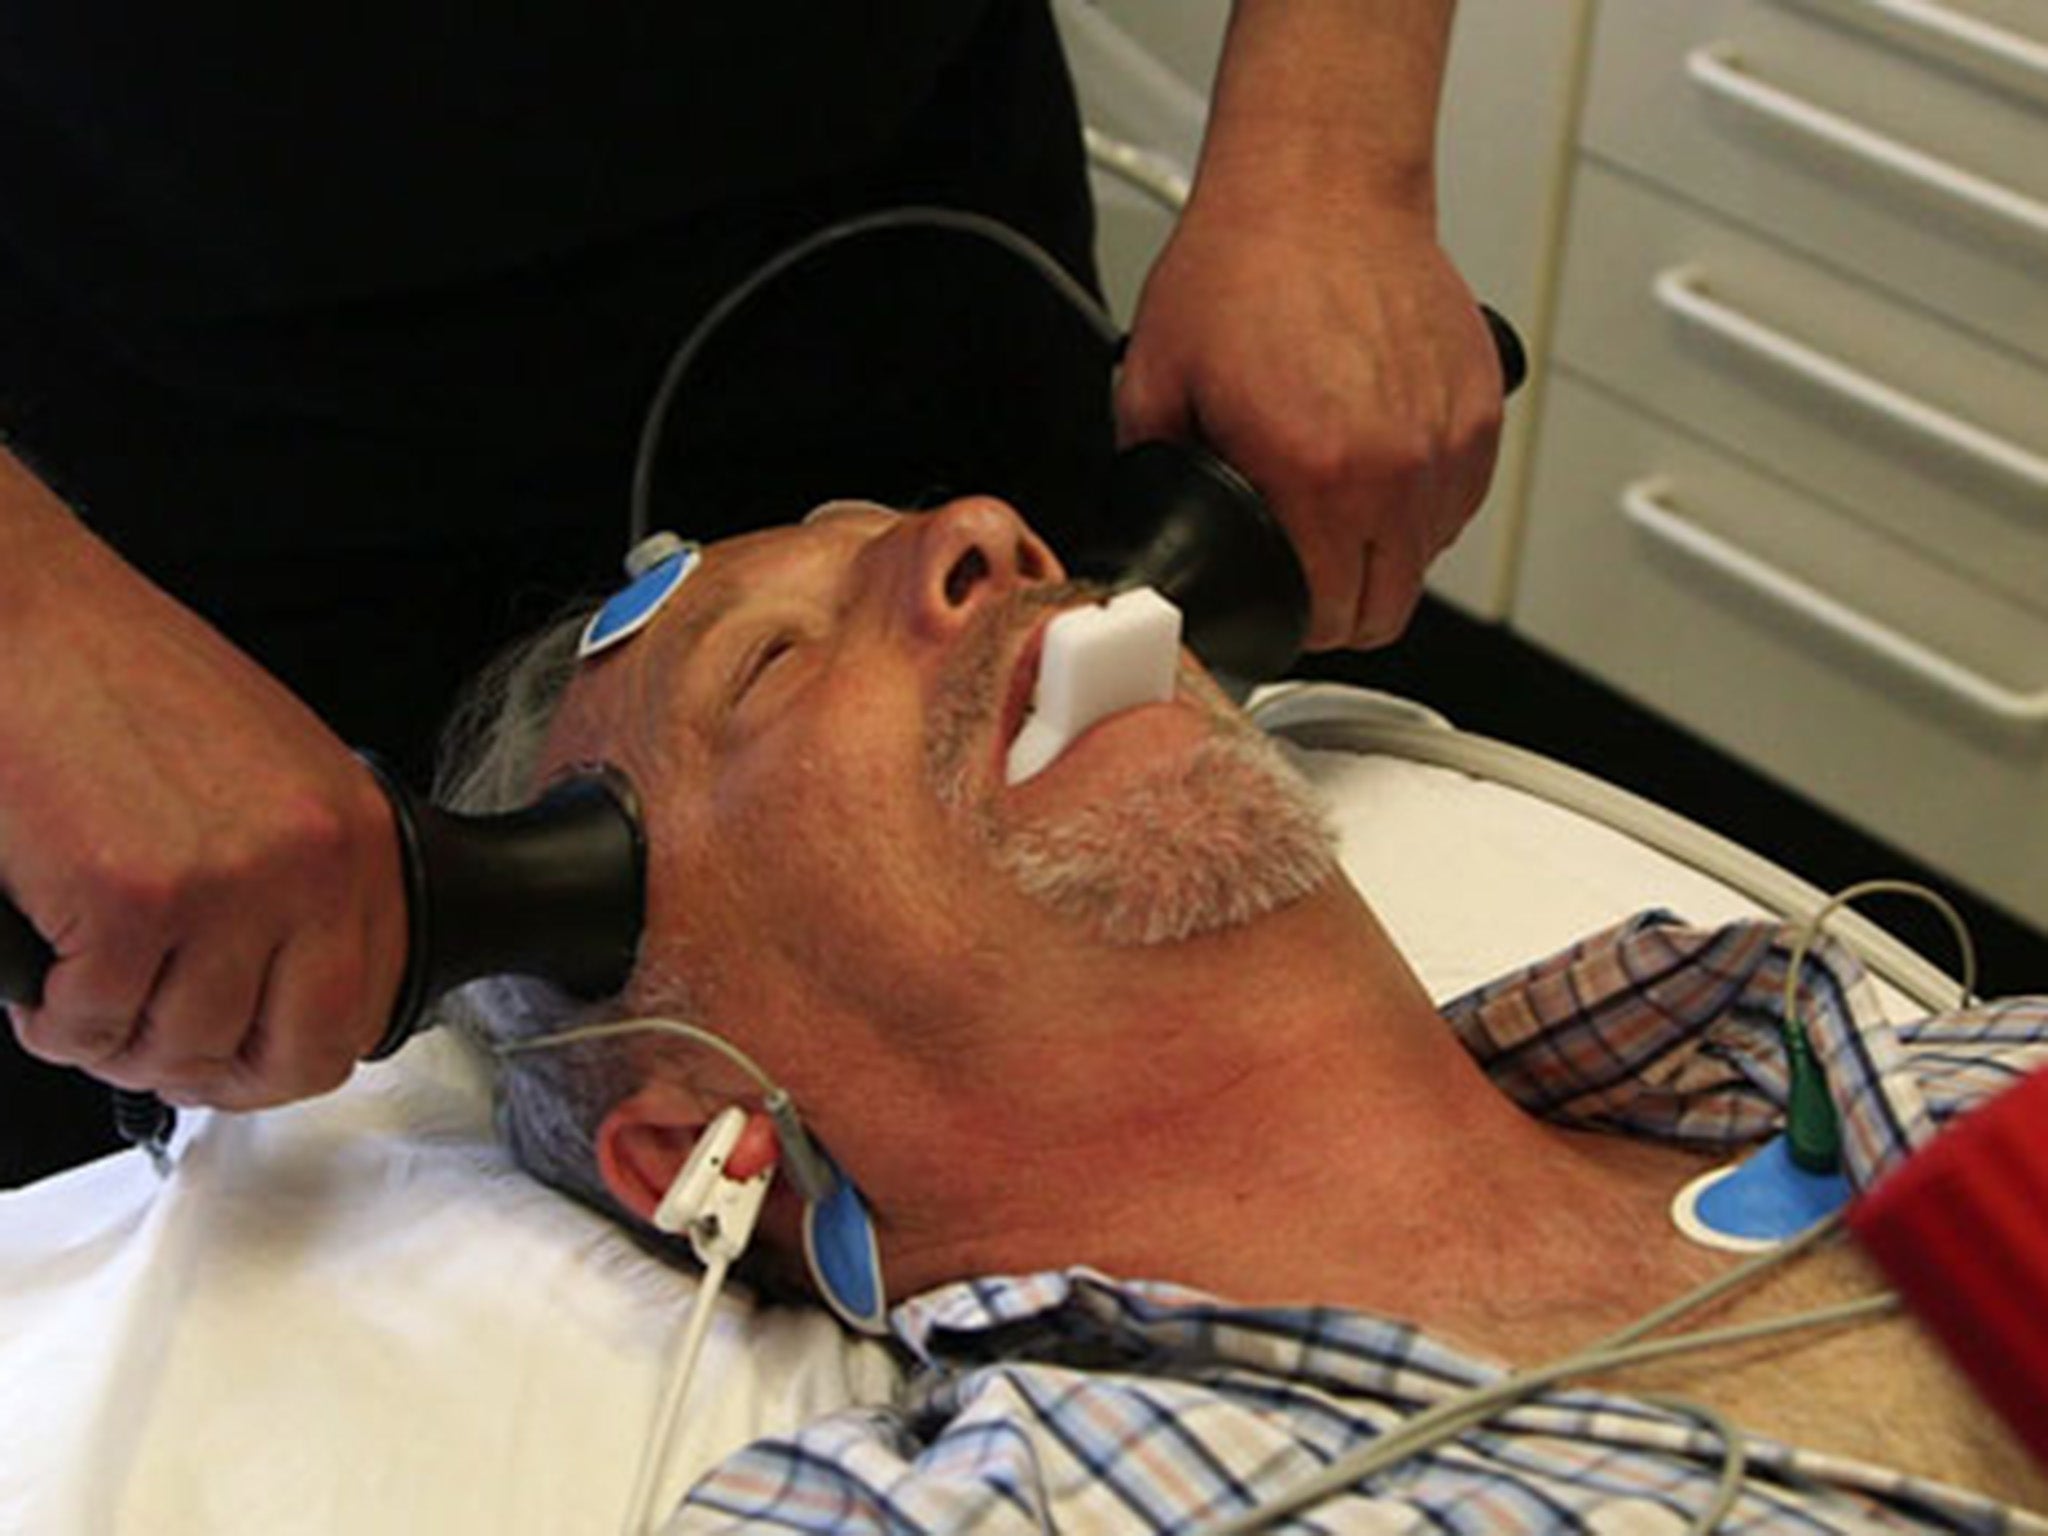 A patient receives electric shock therapy in the UK in 2013